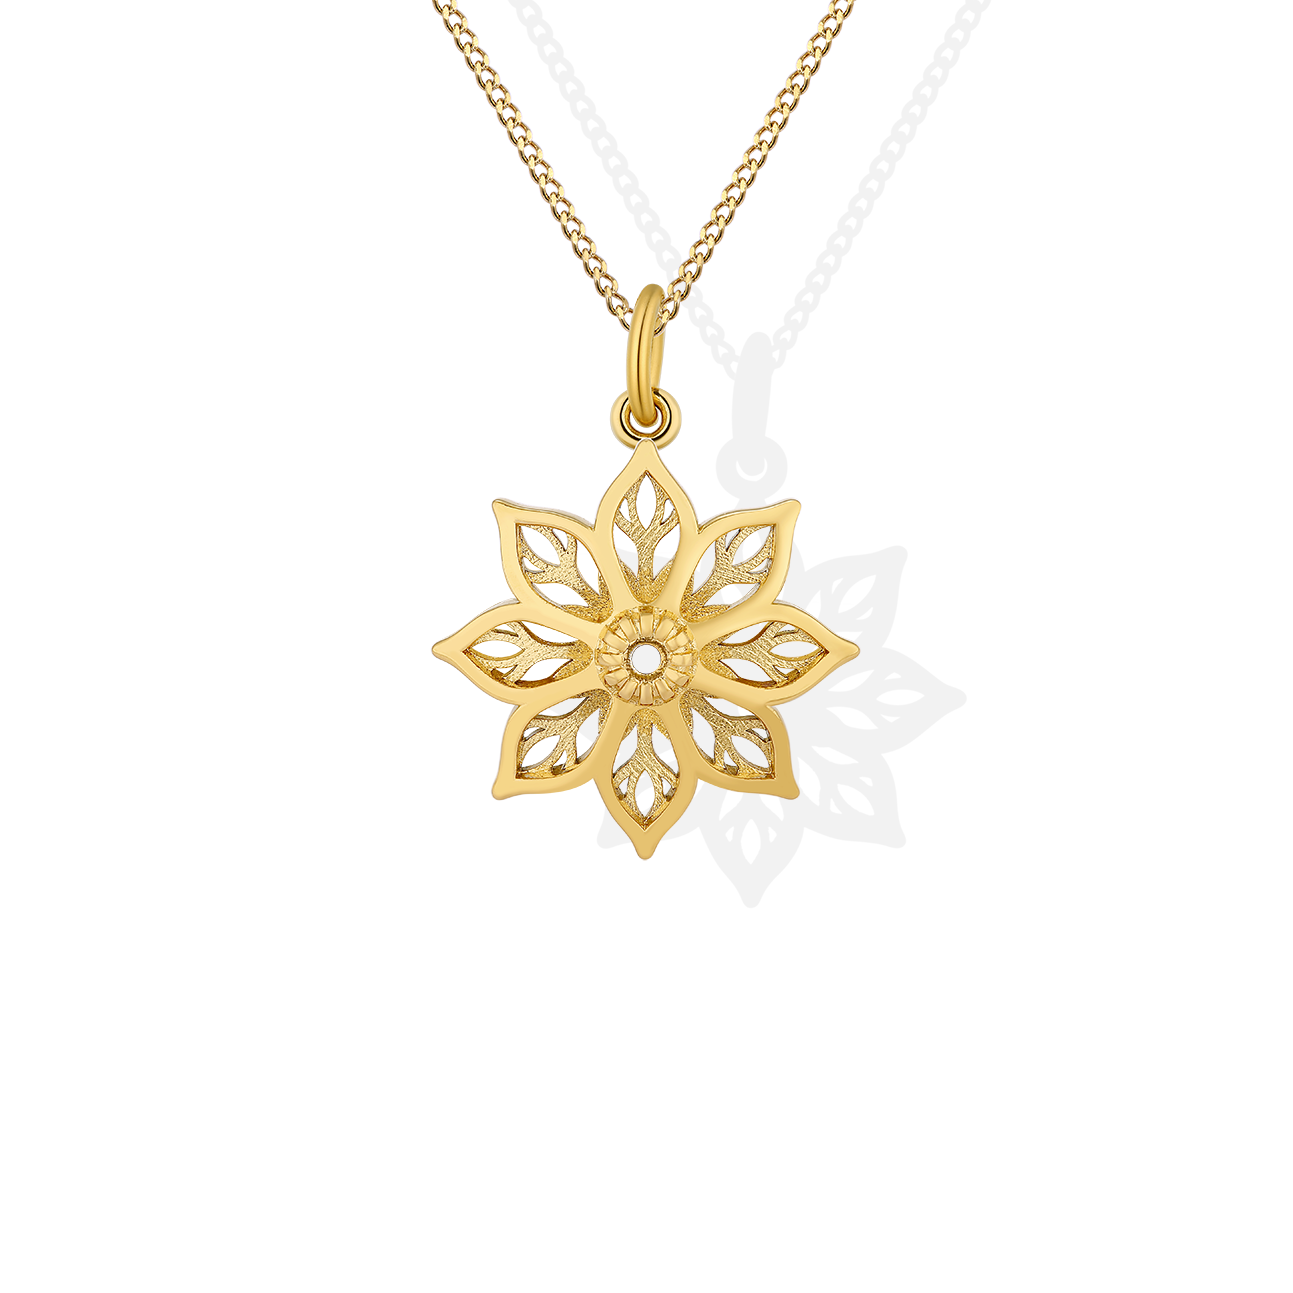 Hollow Out Flower Design Gold Plating Pendant Necklace Jewelry